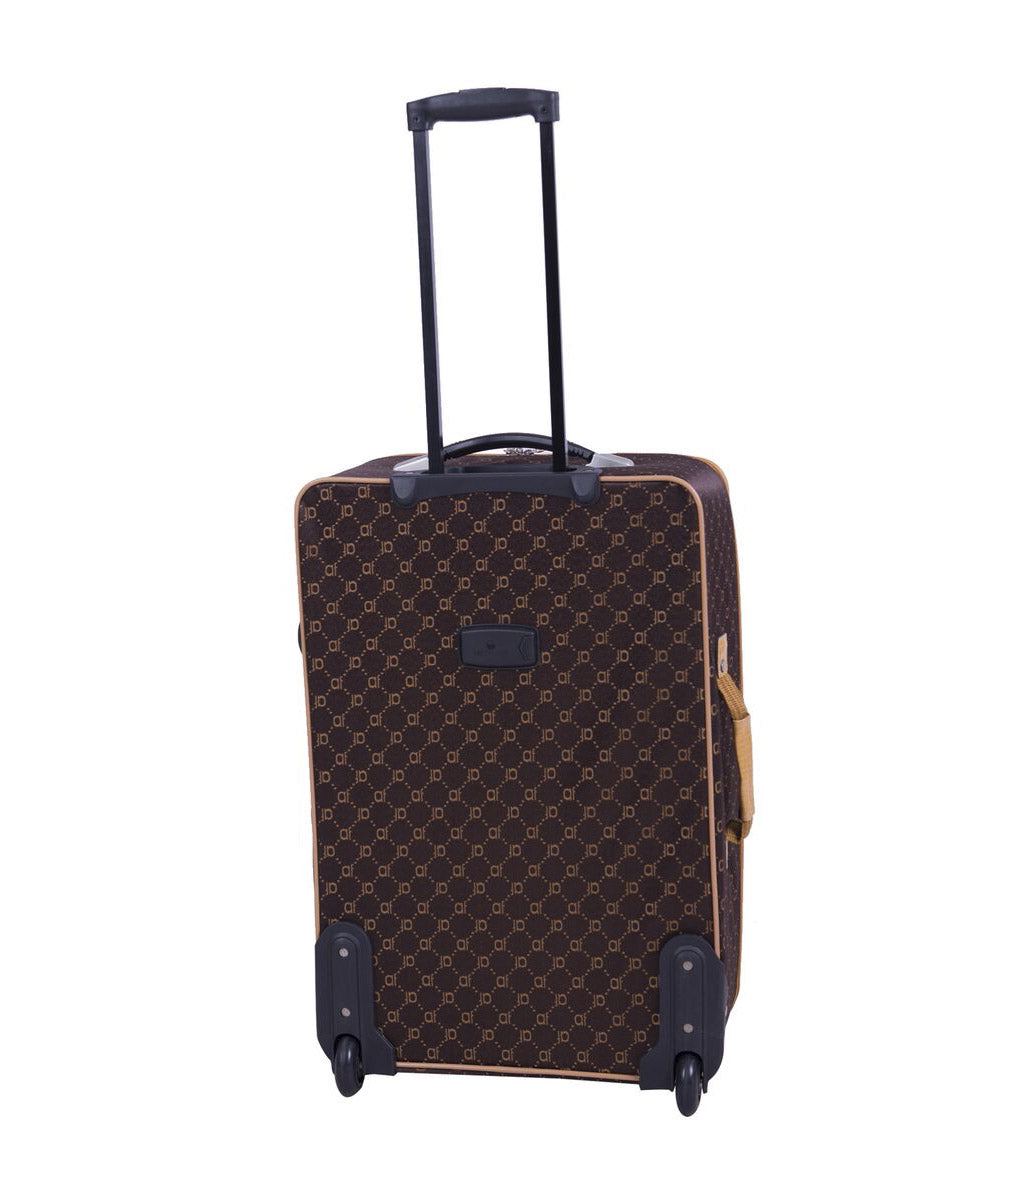 American Flyer Signature 4 Piece Luggage Set - Brown